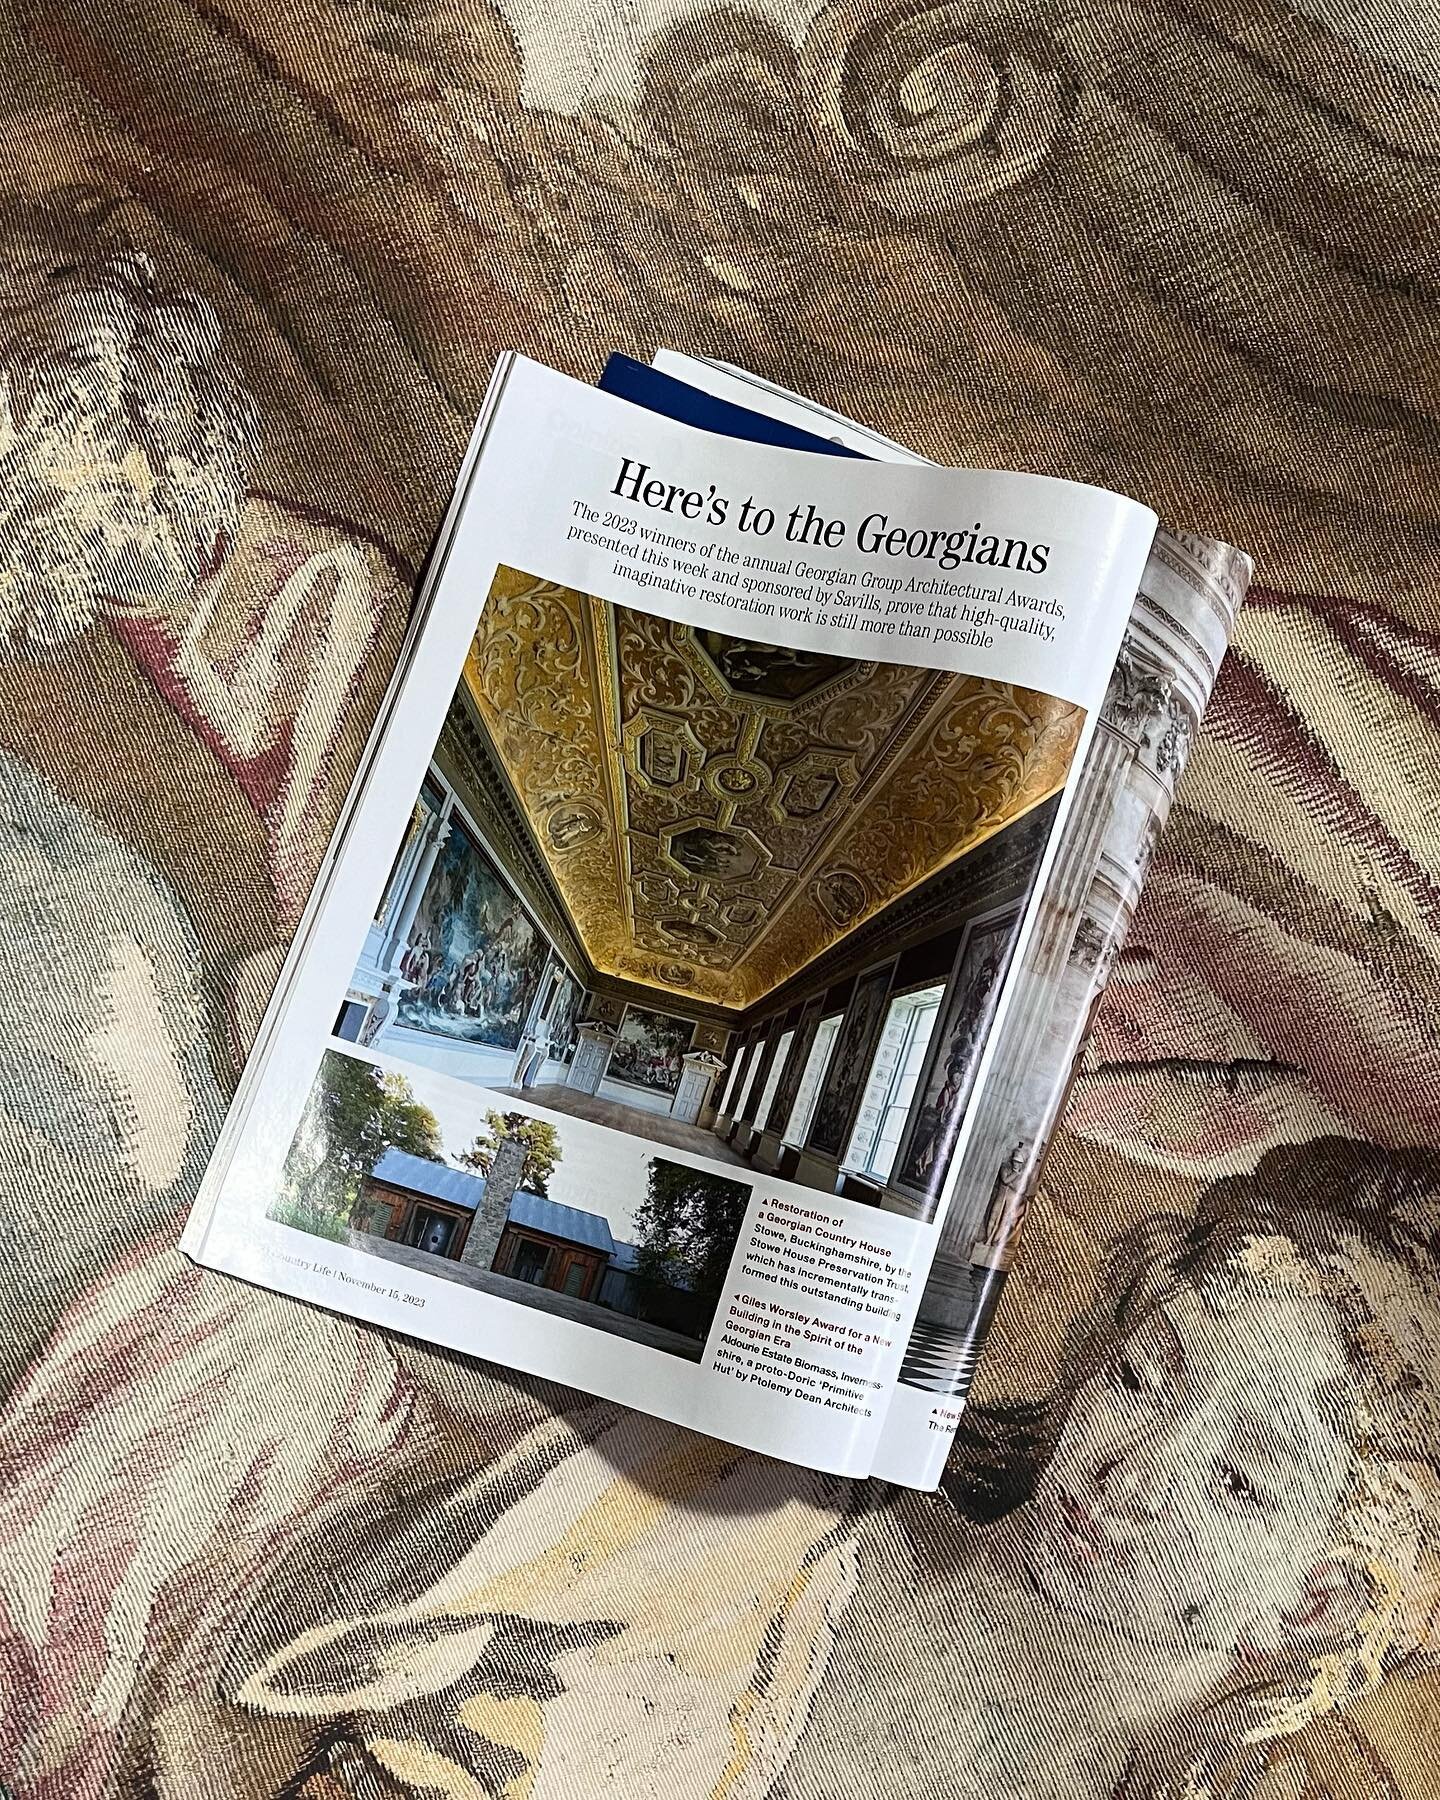 Lovely to see @stowehouse in @countrylifemagazine last week! Stowe is the winner of @thegeorgiangroup Architectural Awards for Restoration of a Georgian Country House. The team at Stowe have done an incredible job orchestrating this restoration and w